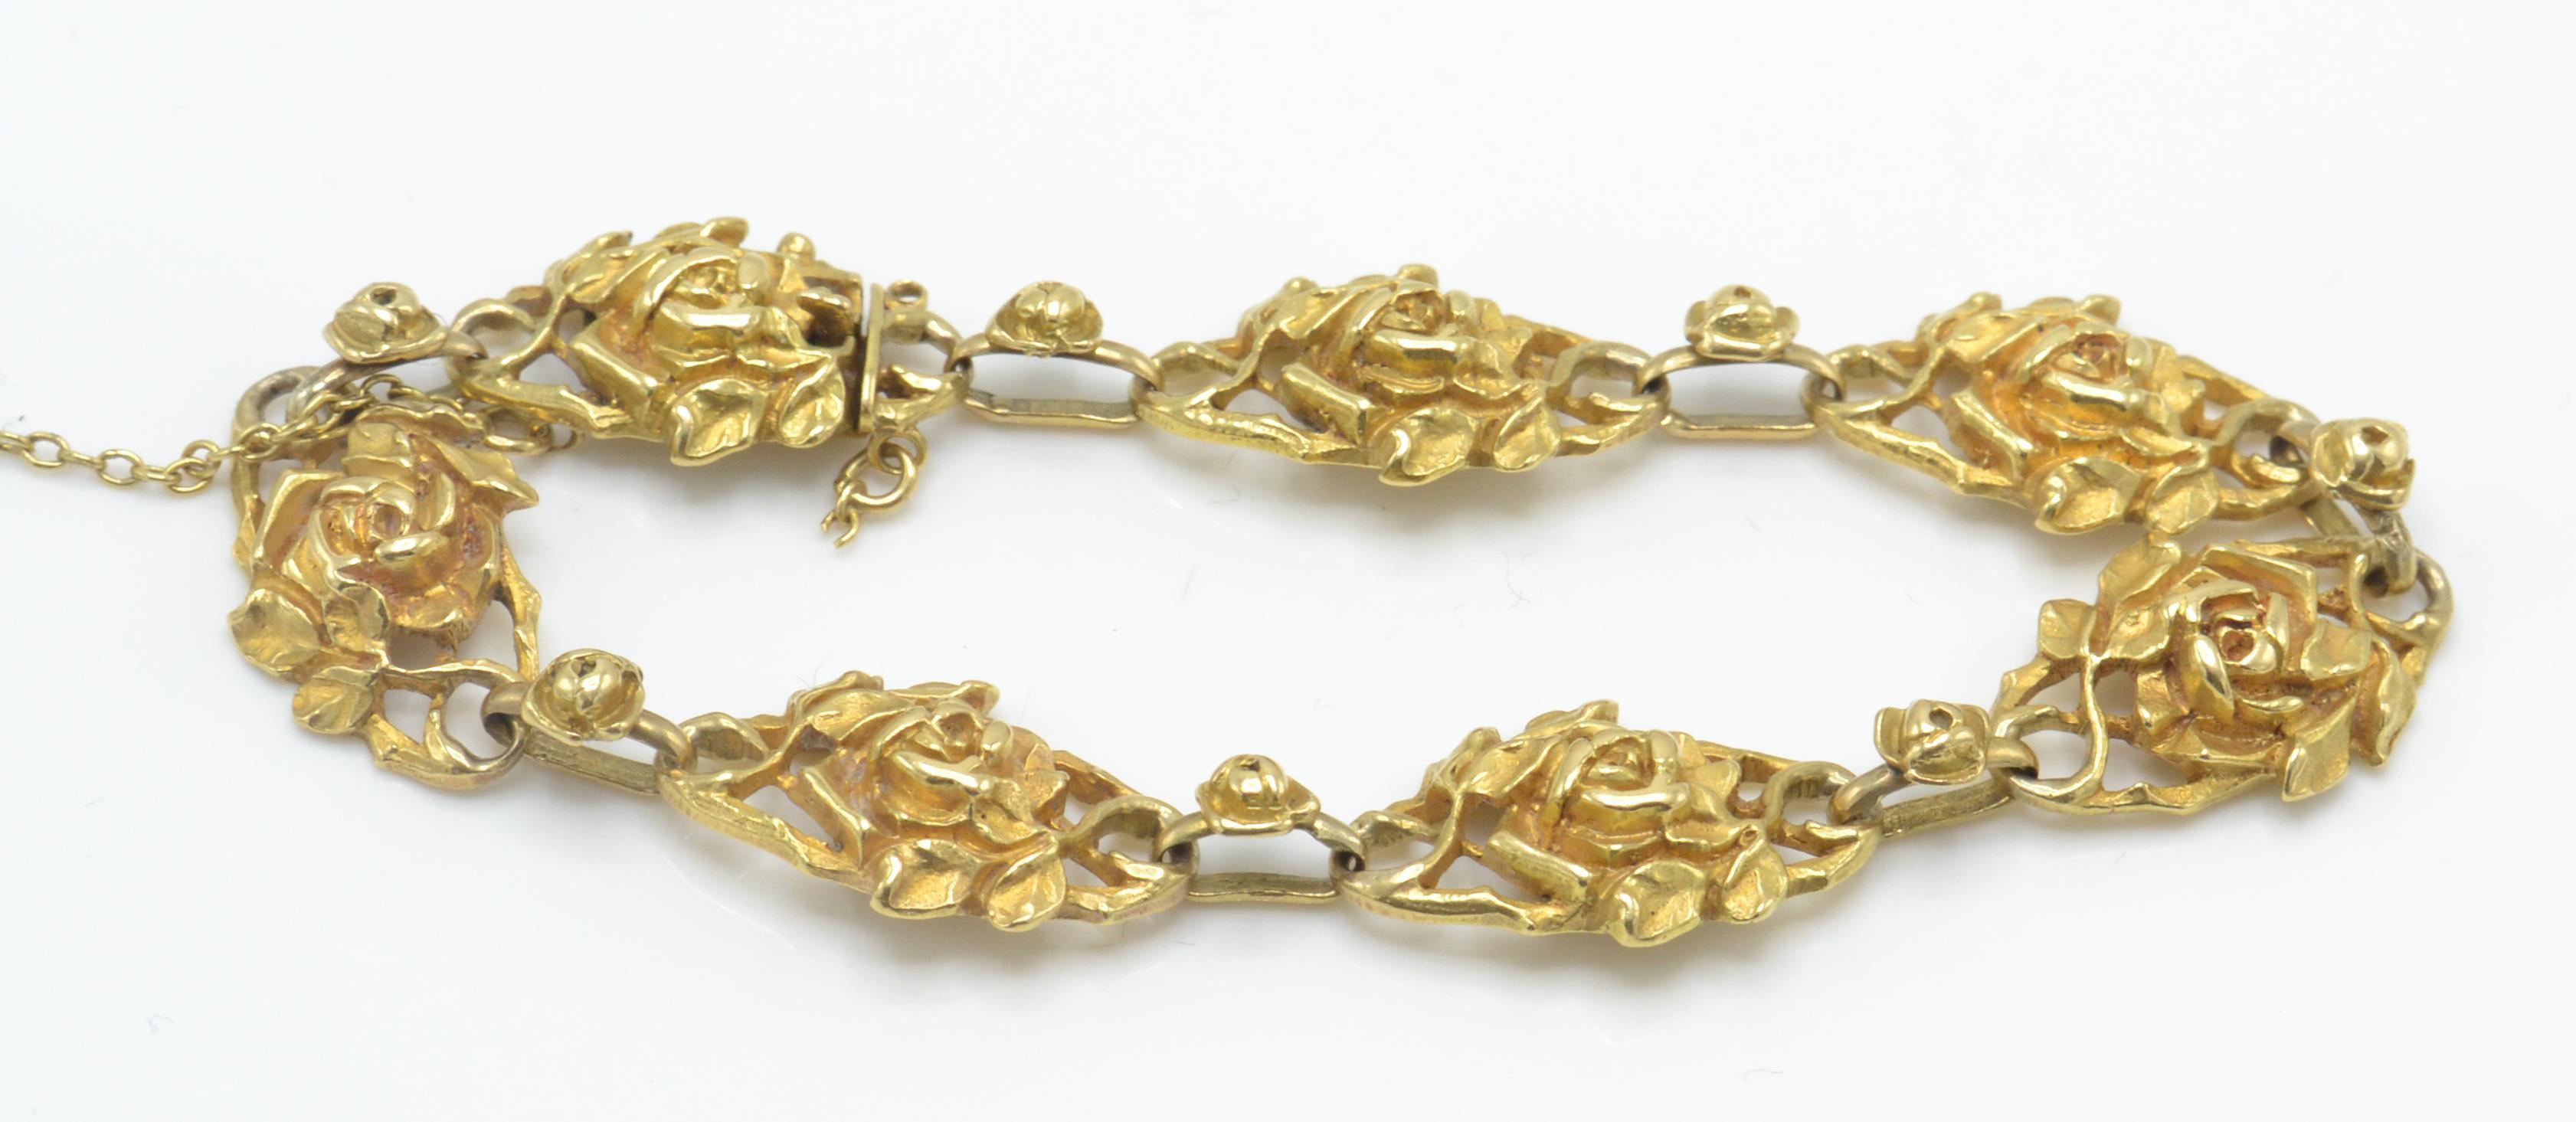 A French gold Art Nouveau seven link bracelet. The bracelet form of openwork links in the form of - Image 8 of 8